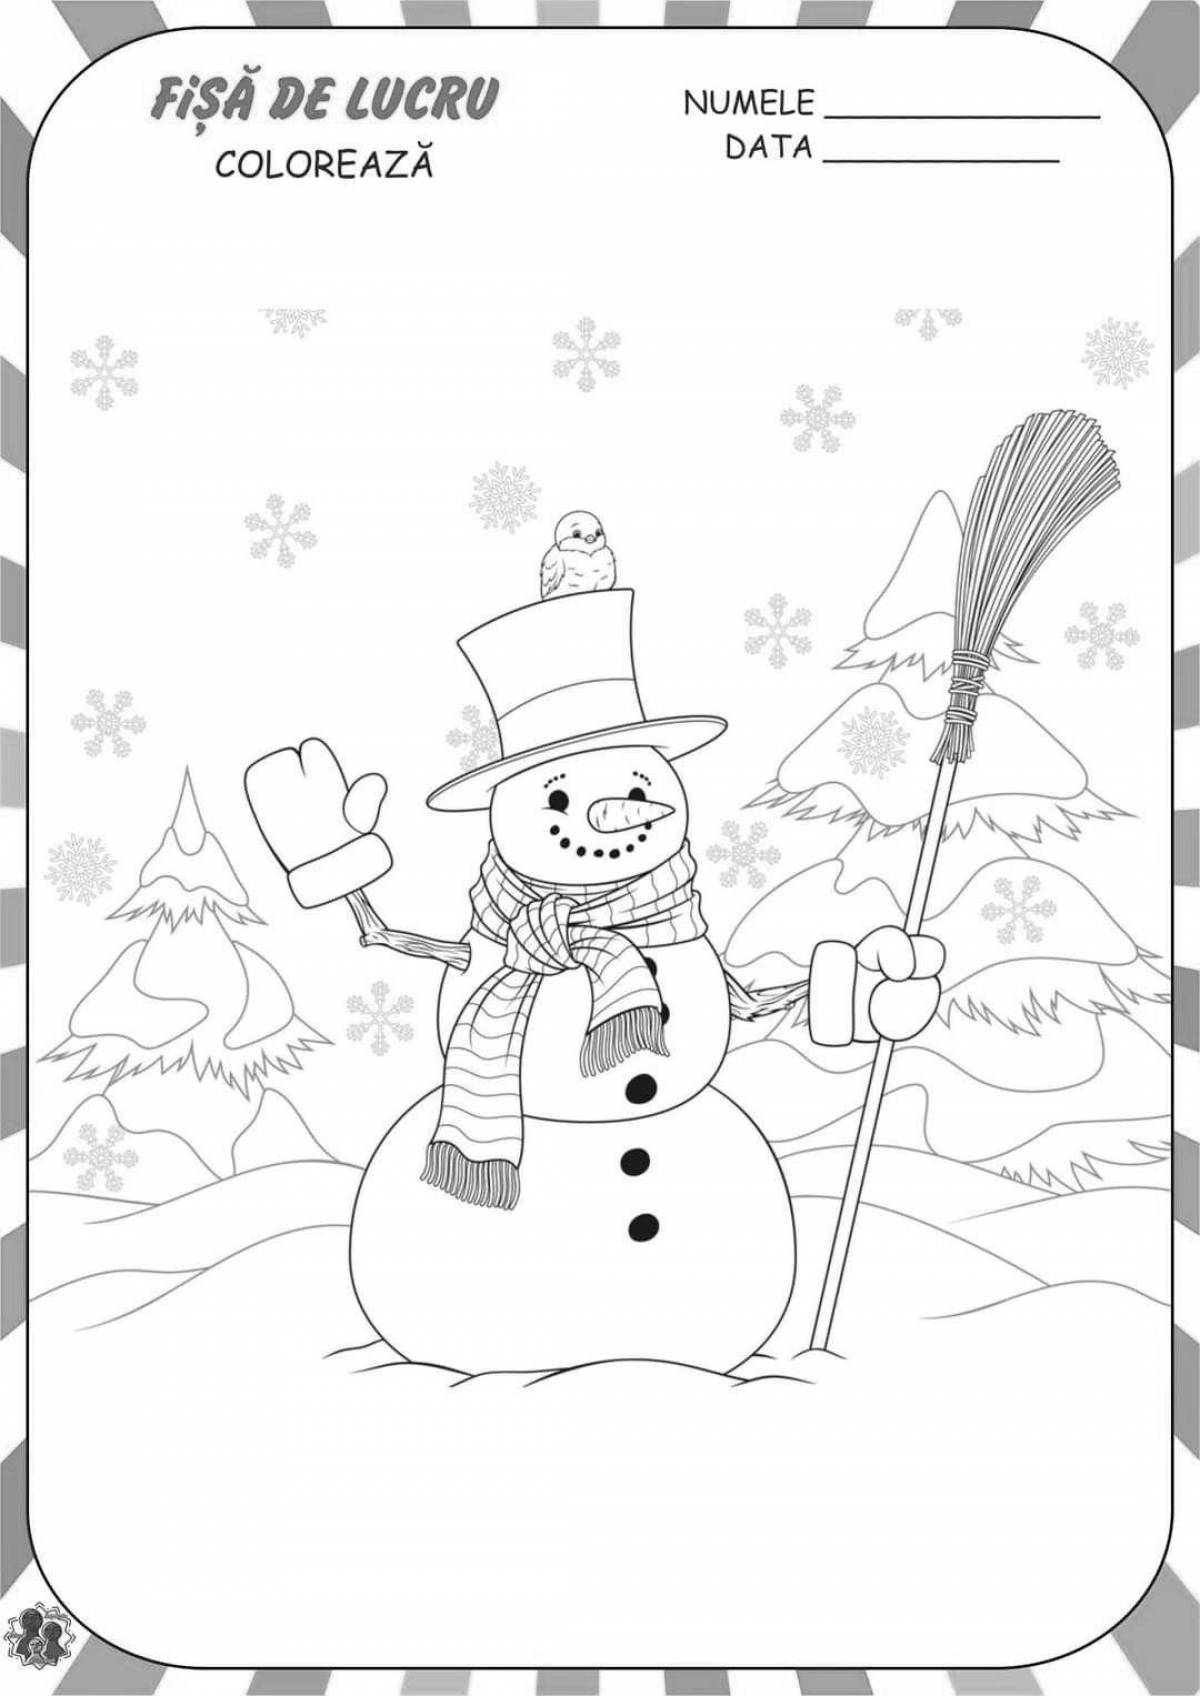 Snowman day coloring page